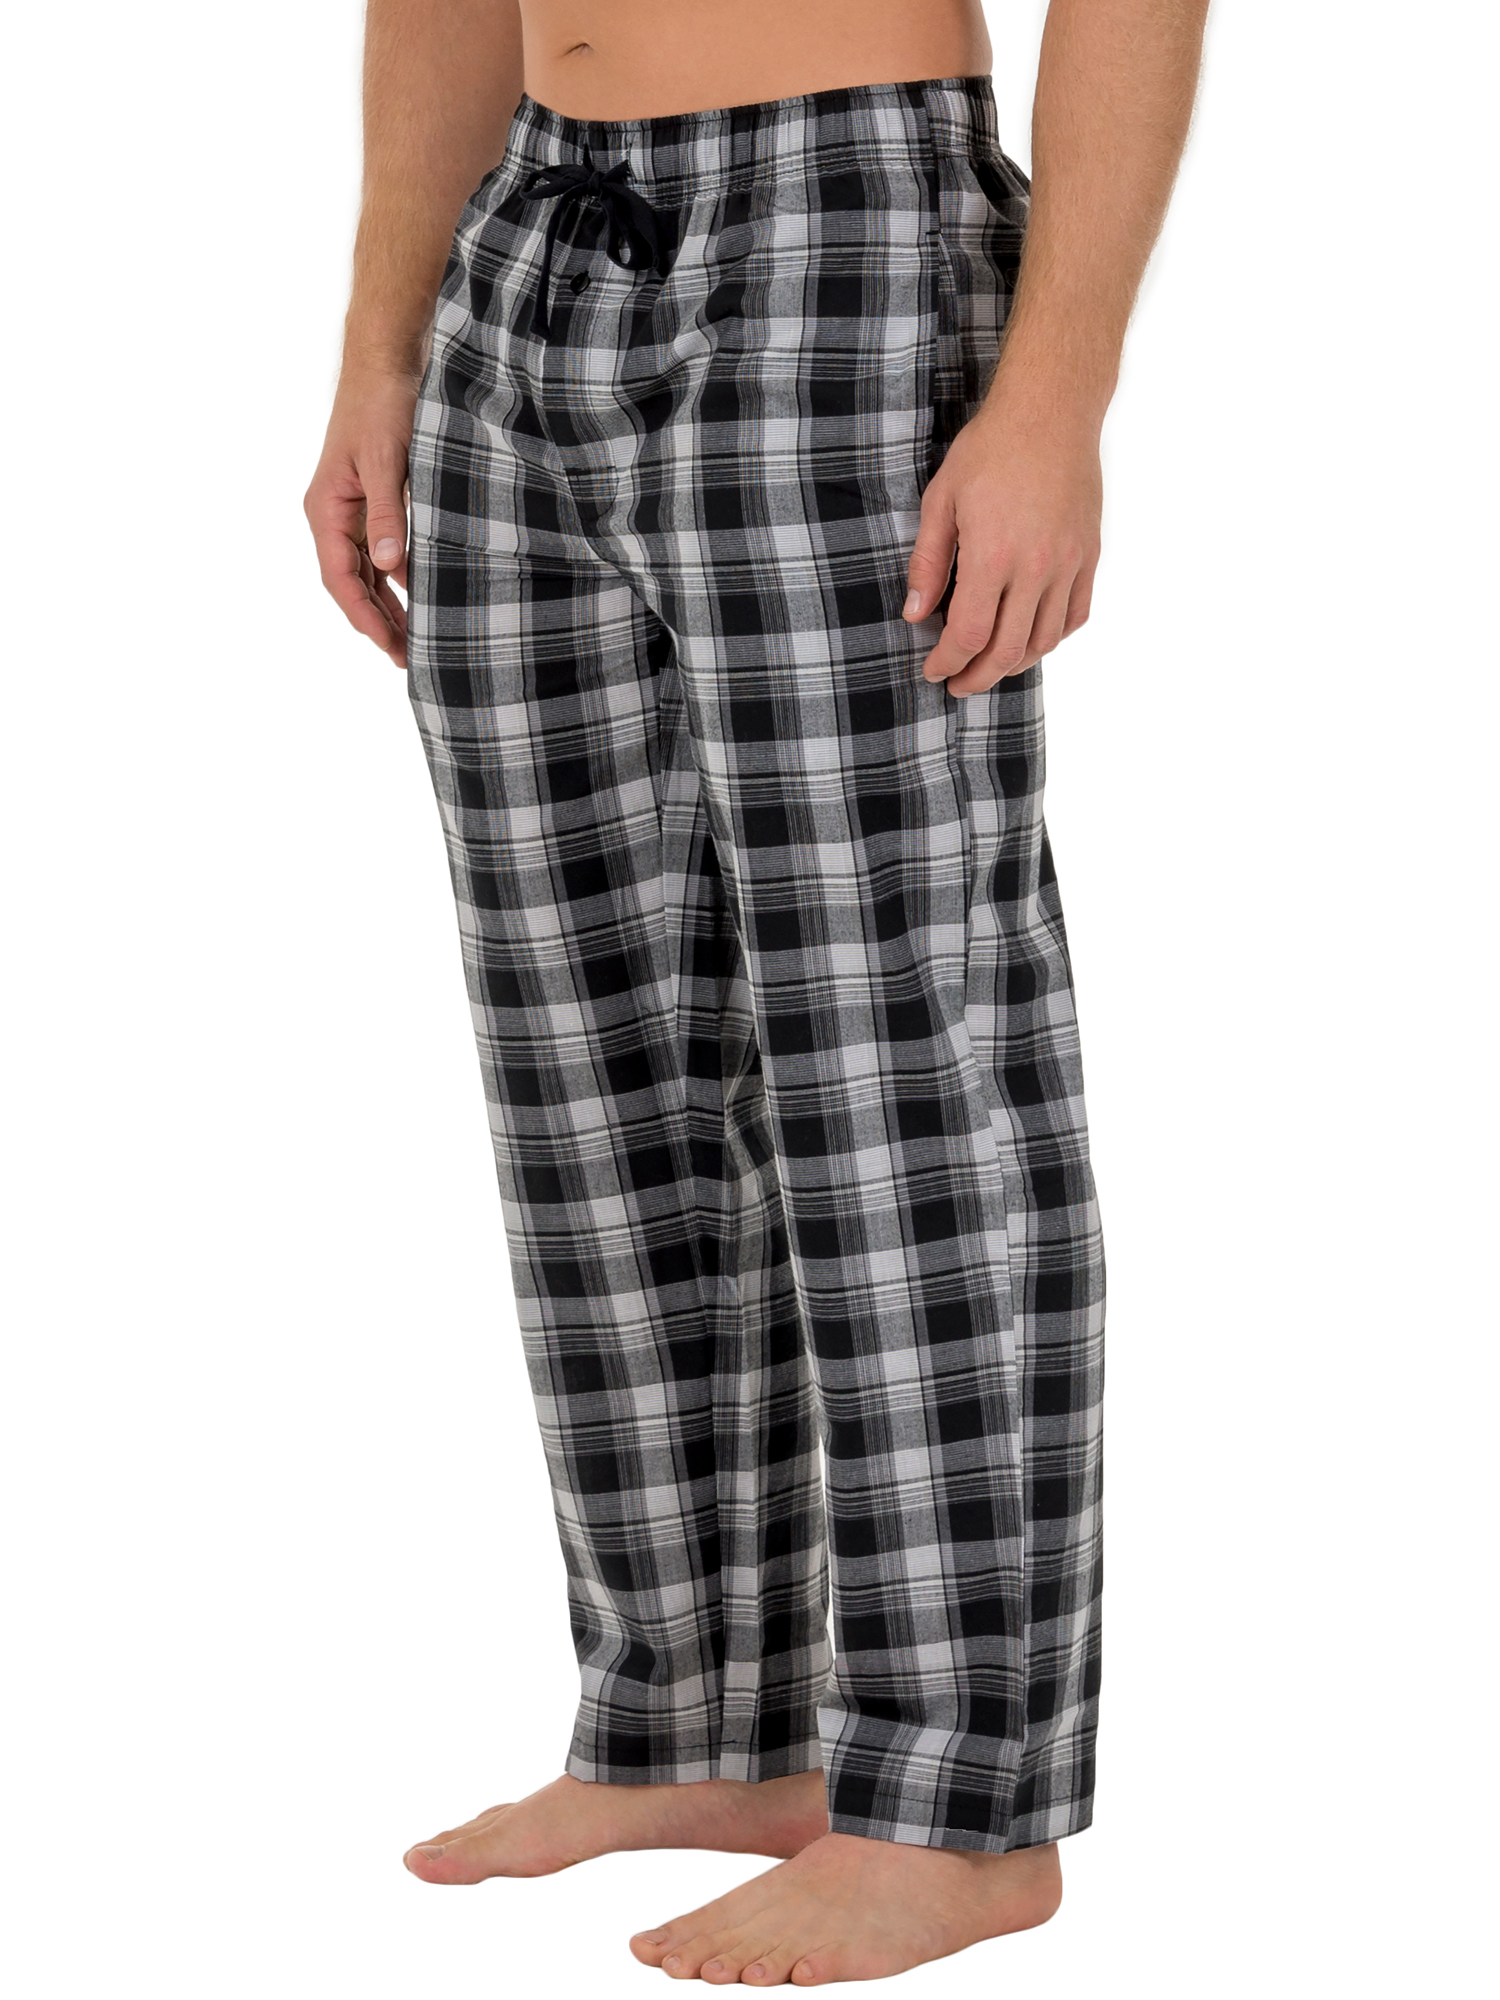 Fruit of the Loom Men's and Big Men's Microsanded Woven Plaid Pajama Pants, Sizes S-6XL & LT-3XLT - image 3 of 6